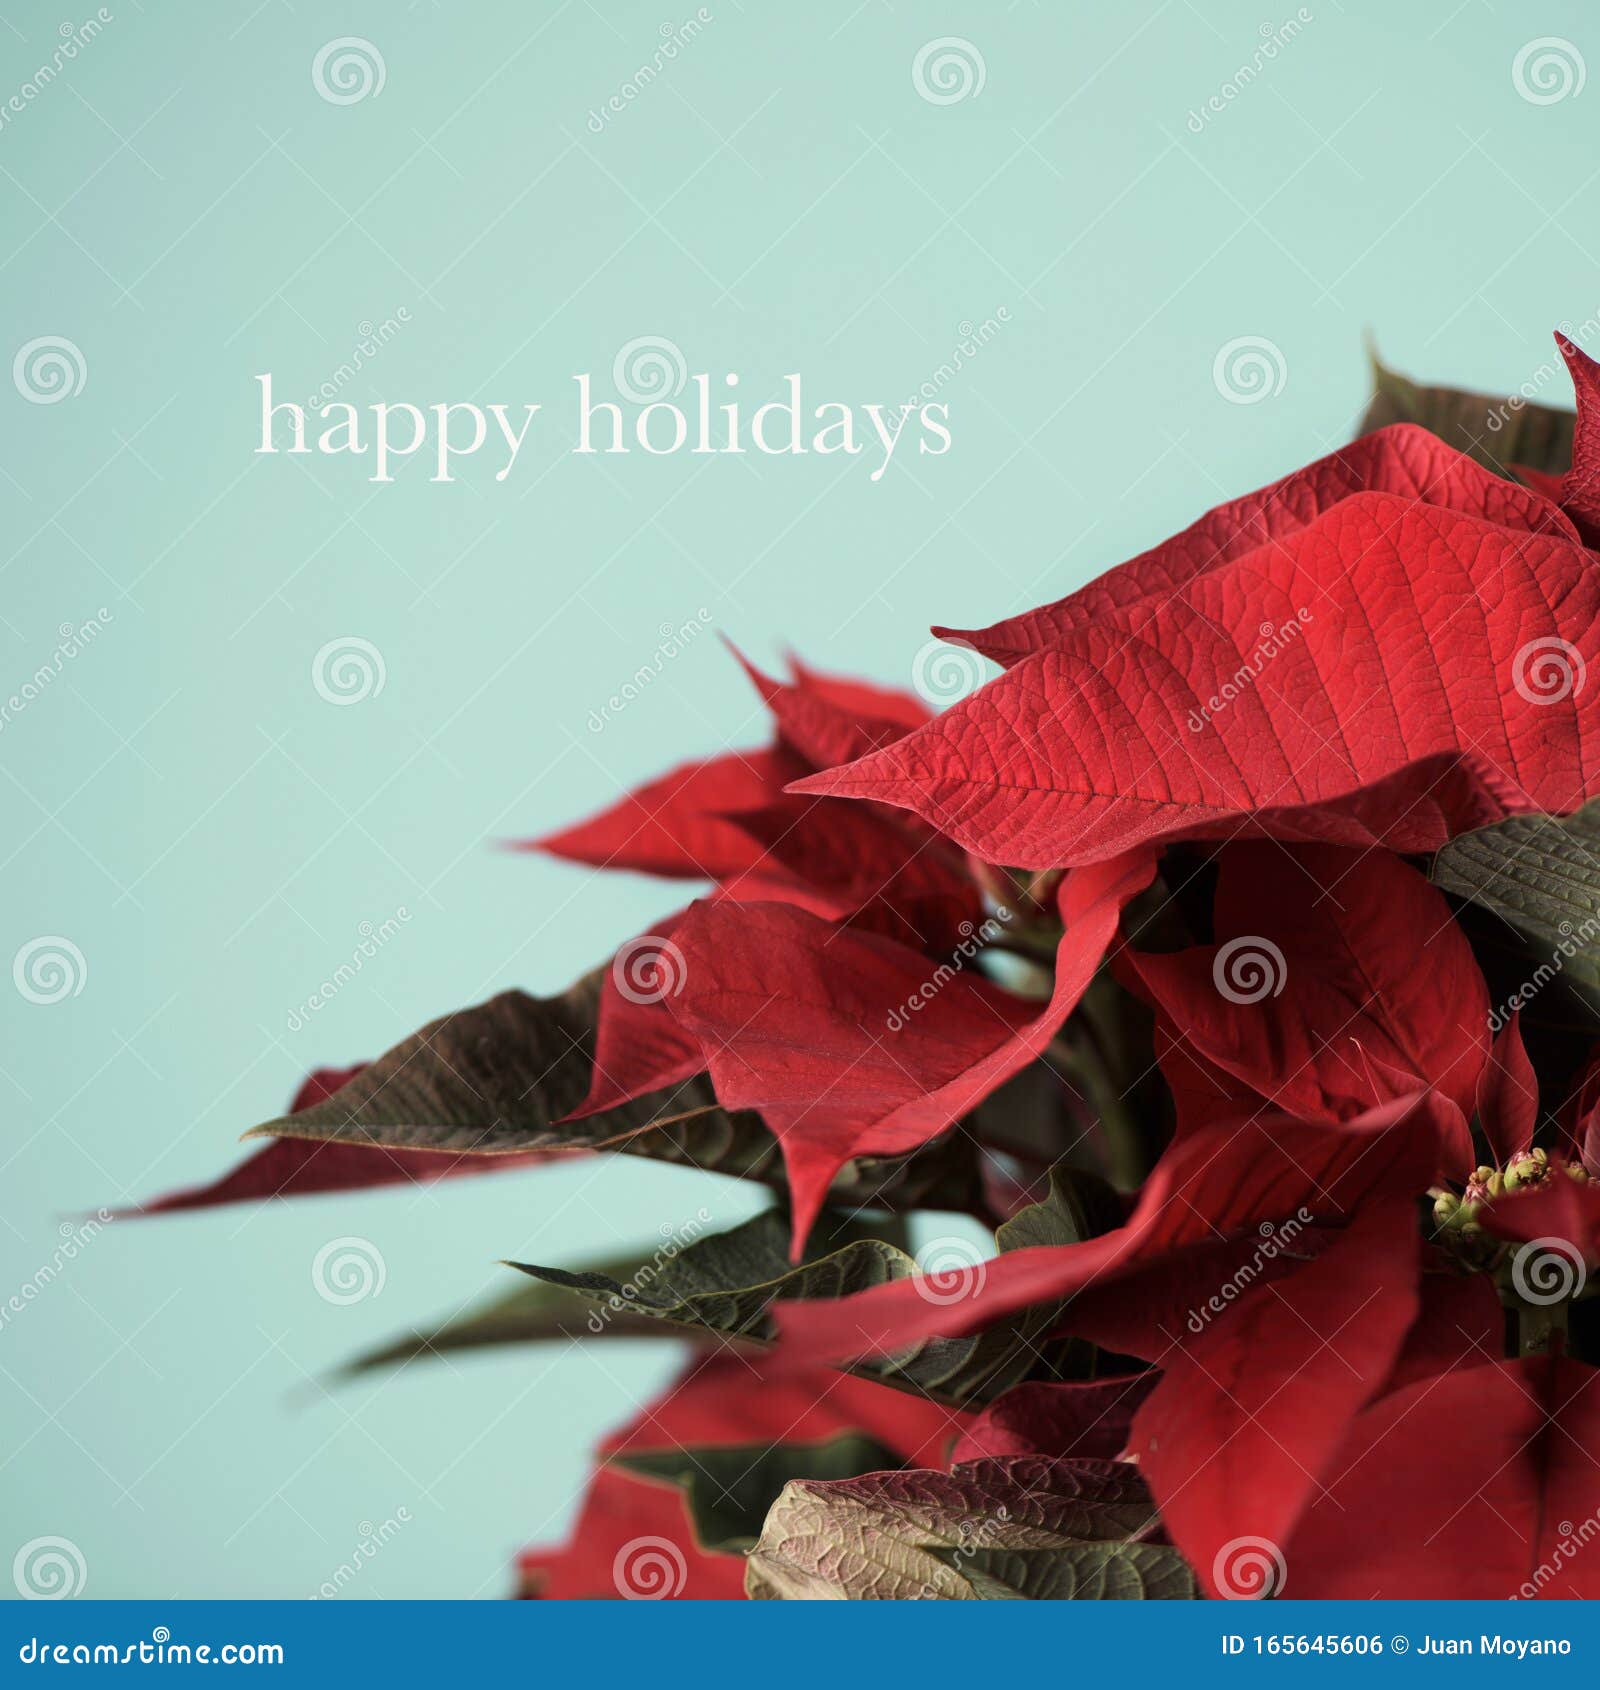 Christmas Flower and Text Happy Holidays Stock Photo - Image of ...